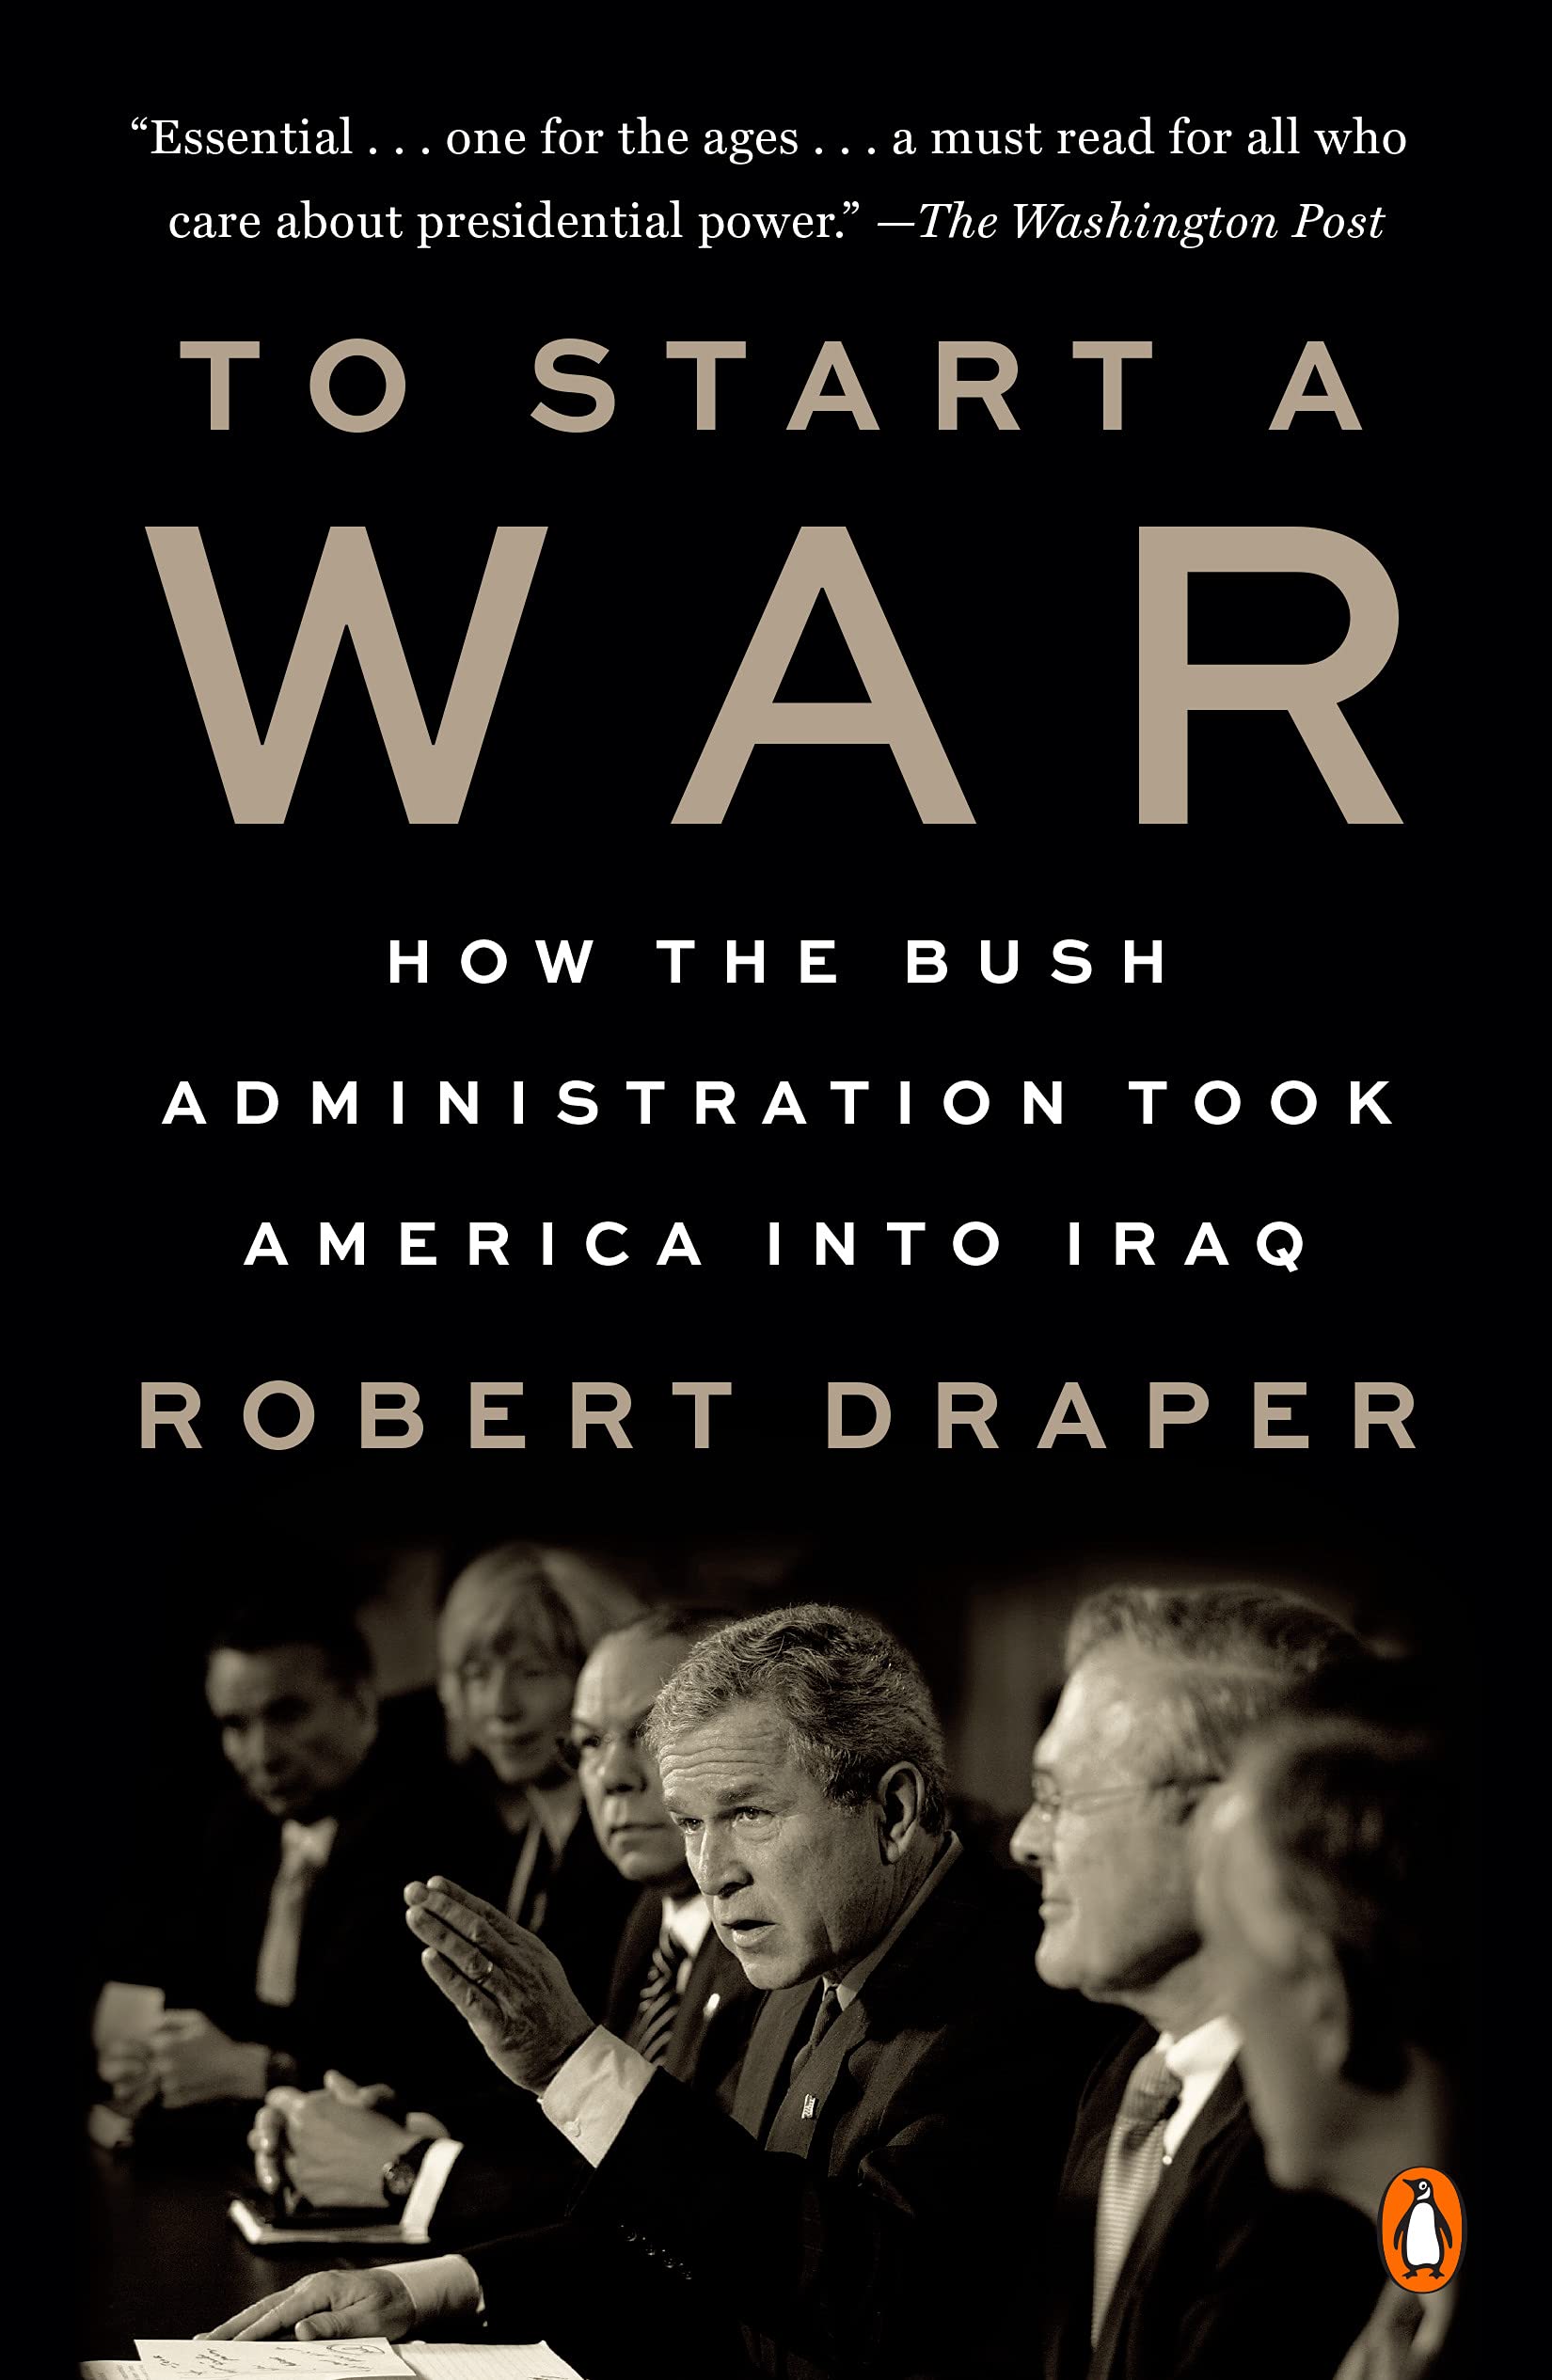 The cover of To Start a War